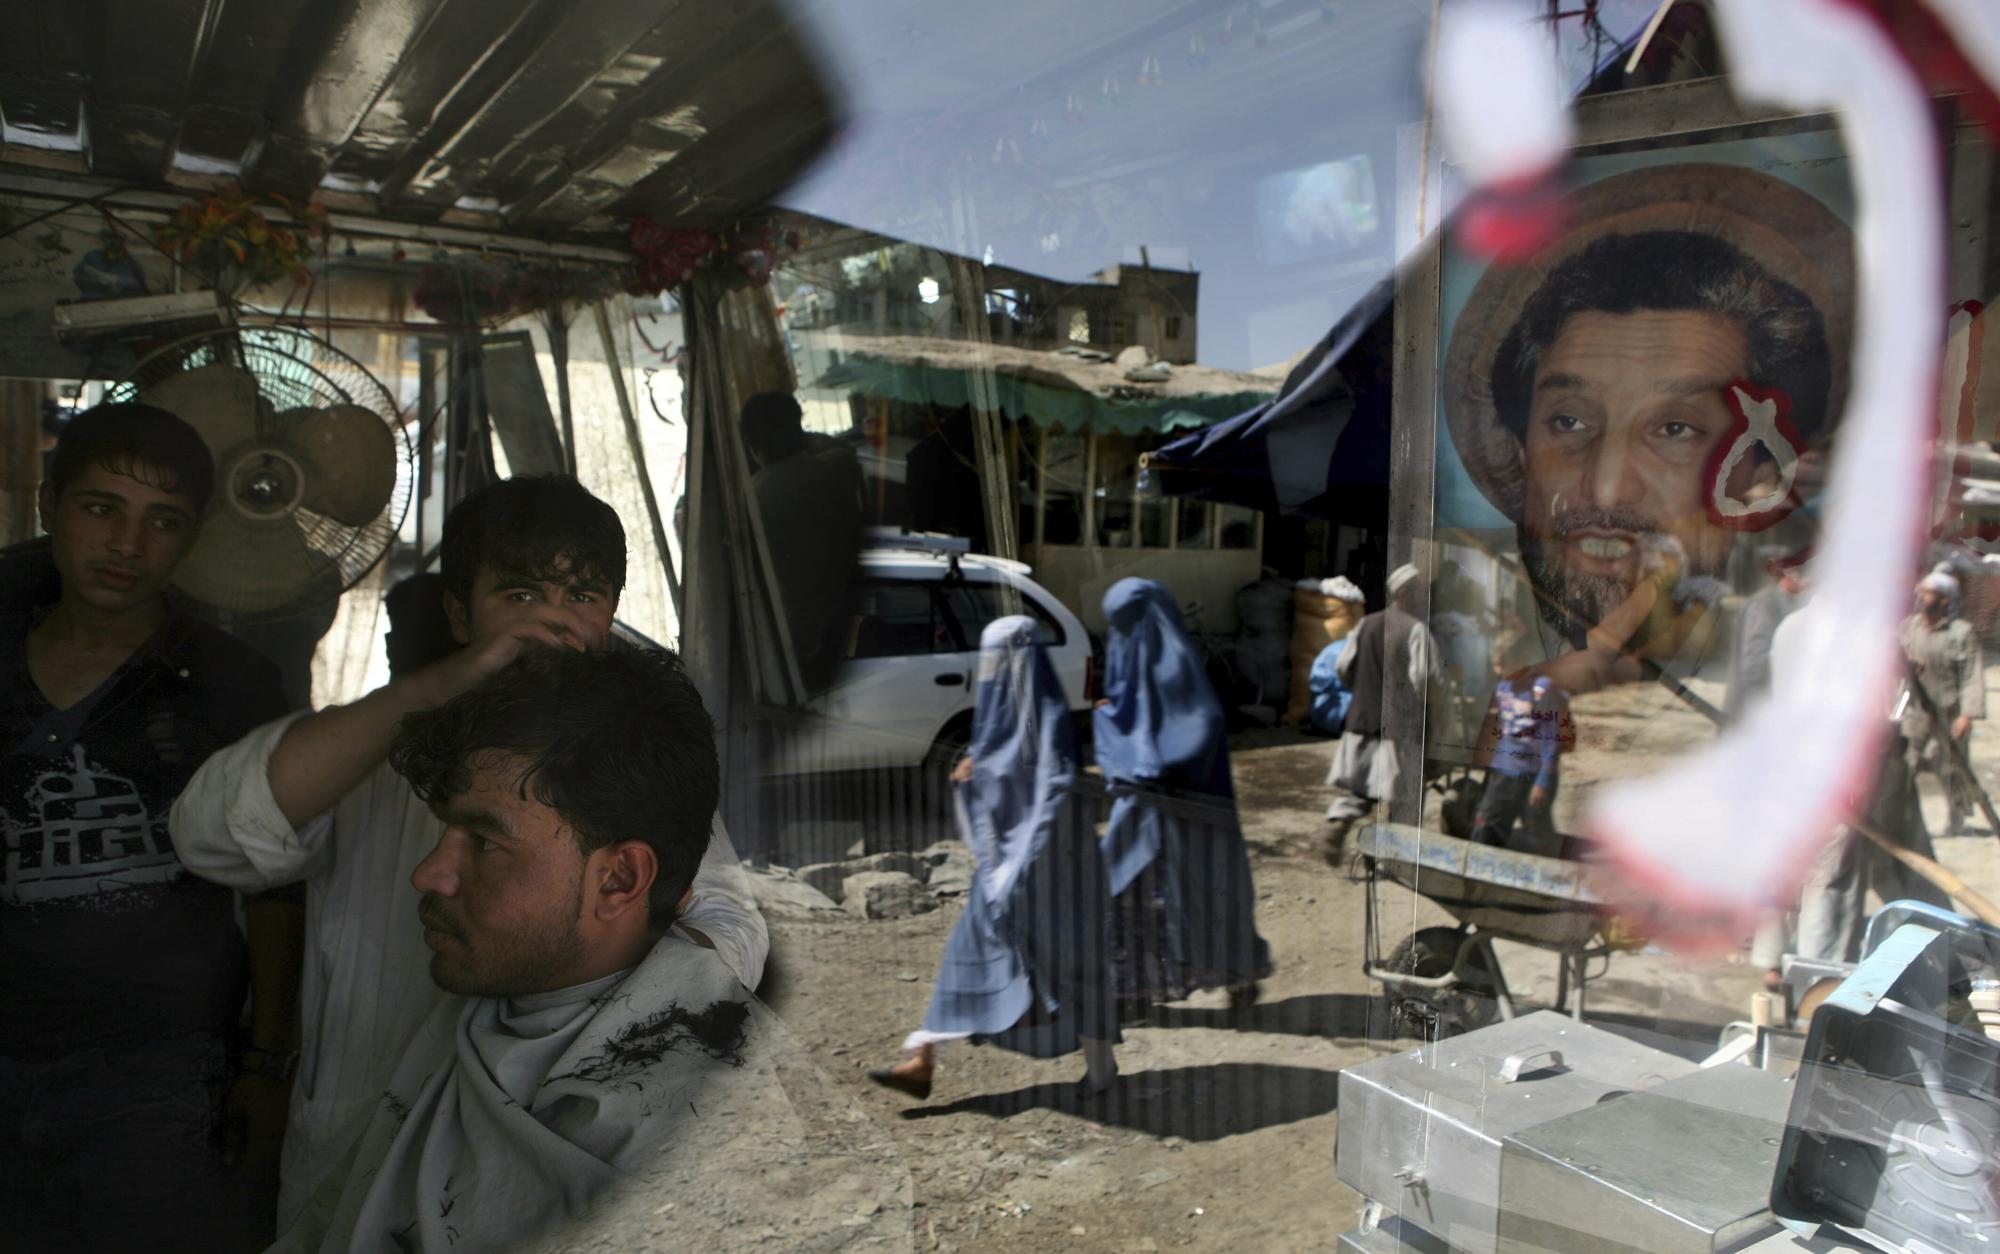 An Afghan barber works on a customer in his shop as a portrait of Afghanistan national hero Ahmad Shah Massoud adorns its door in Kabul, Afghanistan, Tuesday, Sept. 29, 2009. (AP Photo/Altaf Qadri)